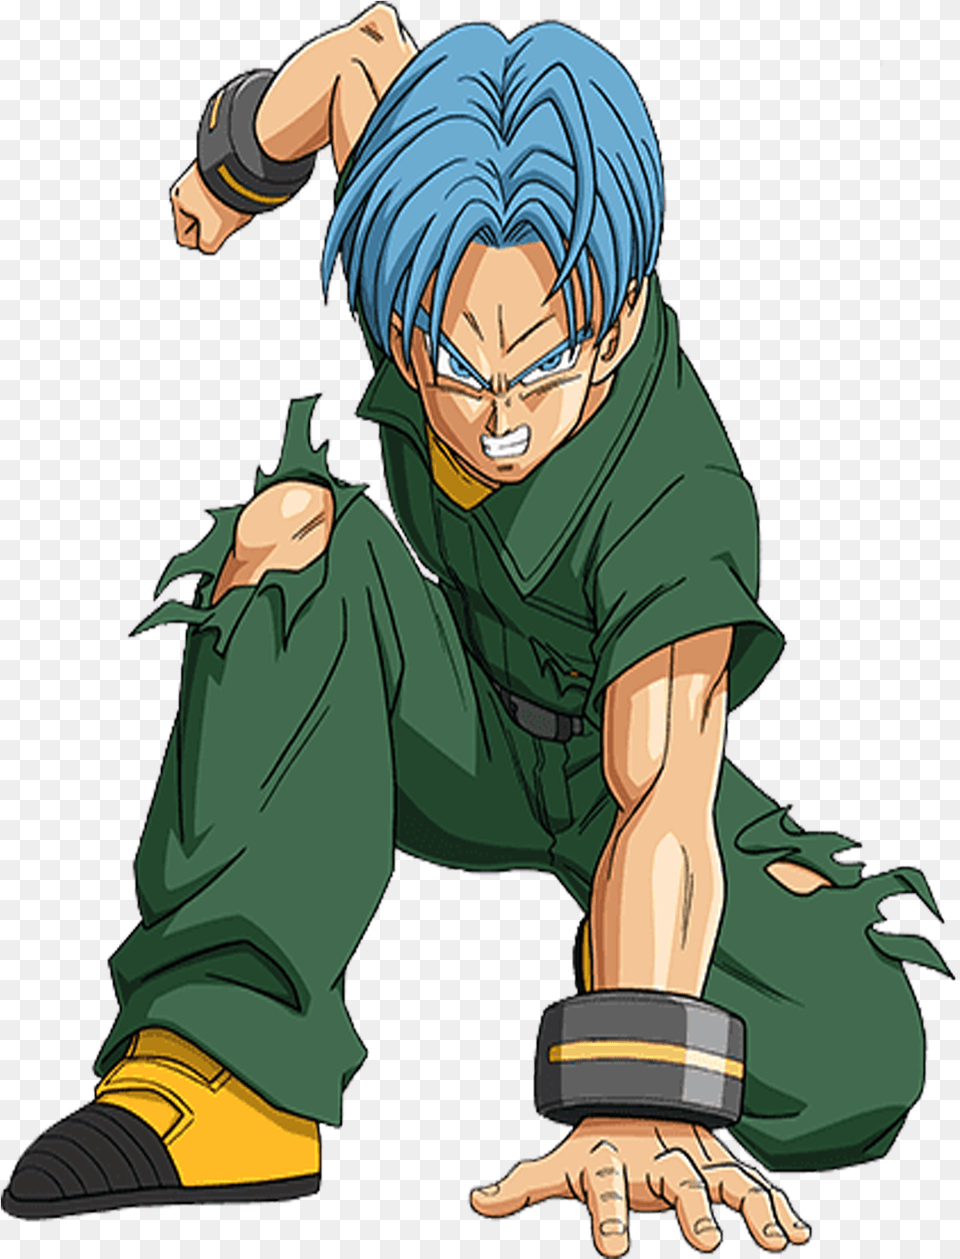 Dragon Ball Z Marron And Trunks Super Dragon Ball Heroes Trunks, Book, Publication, Comics, Adult Png